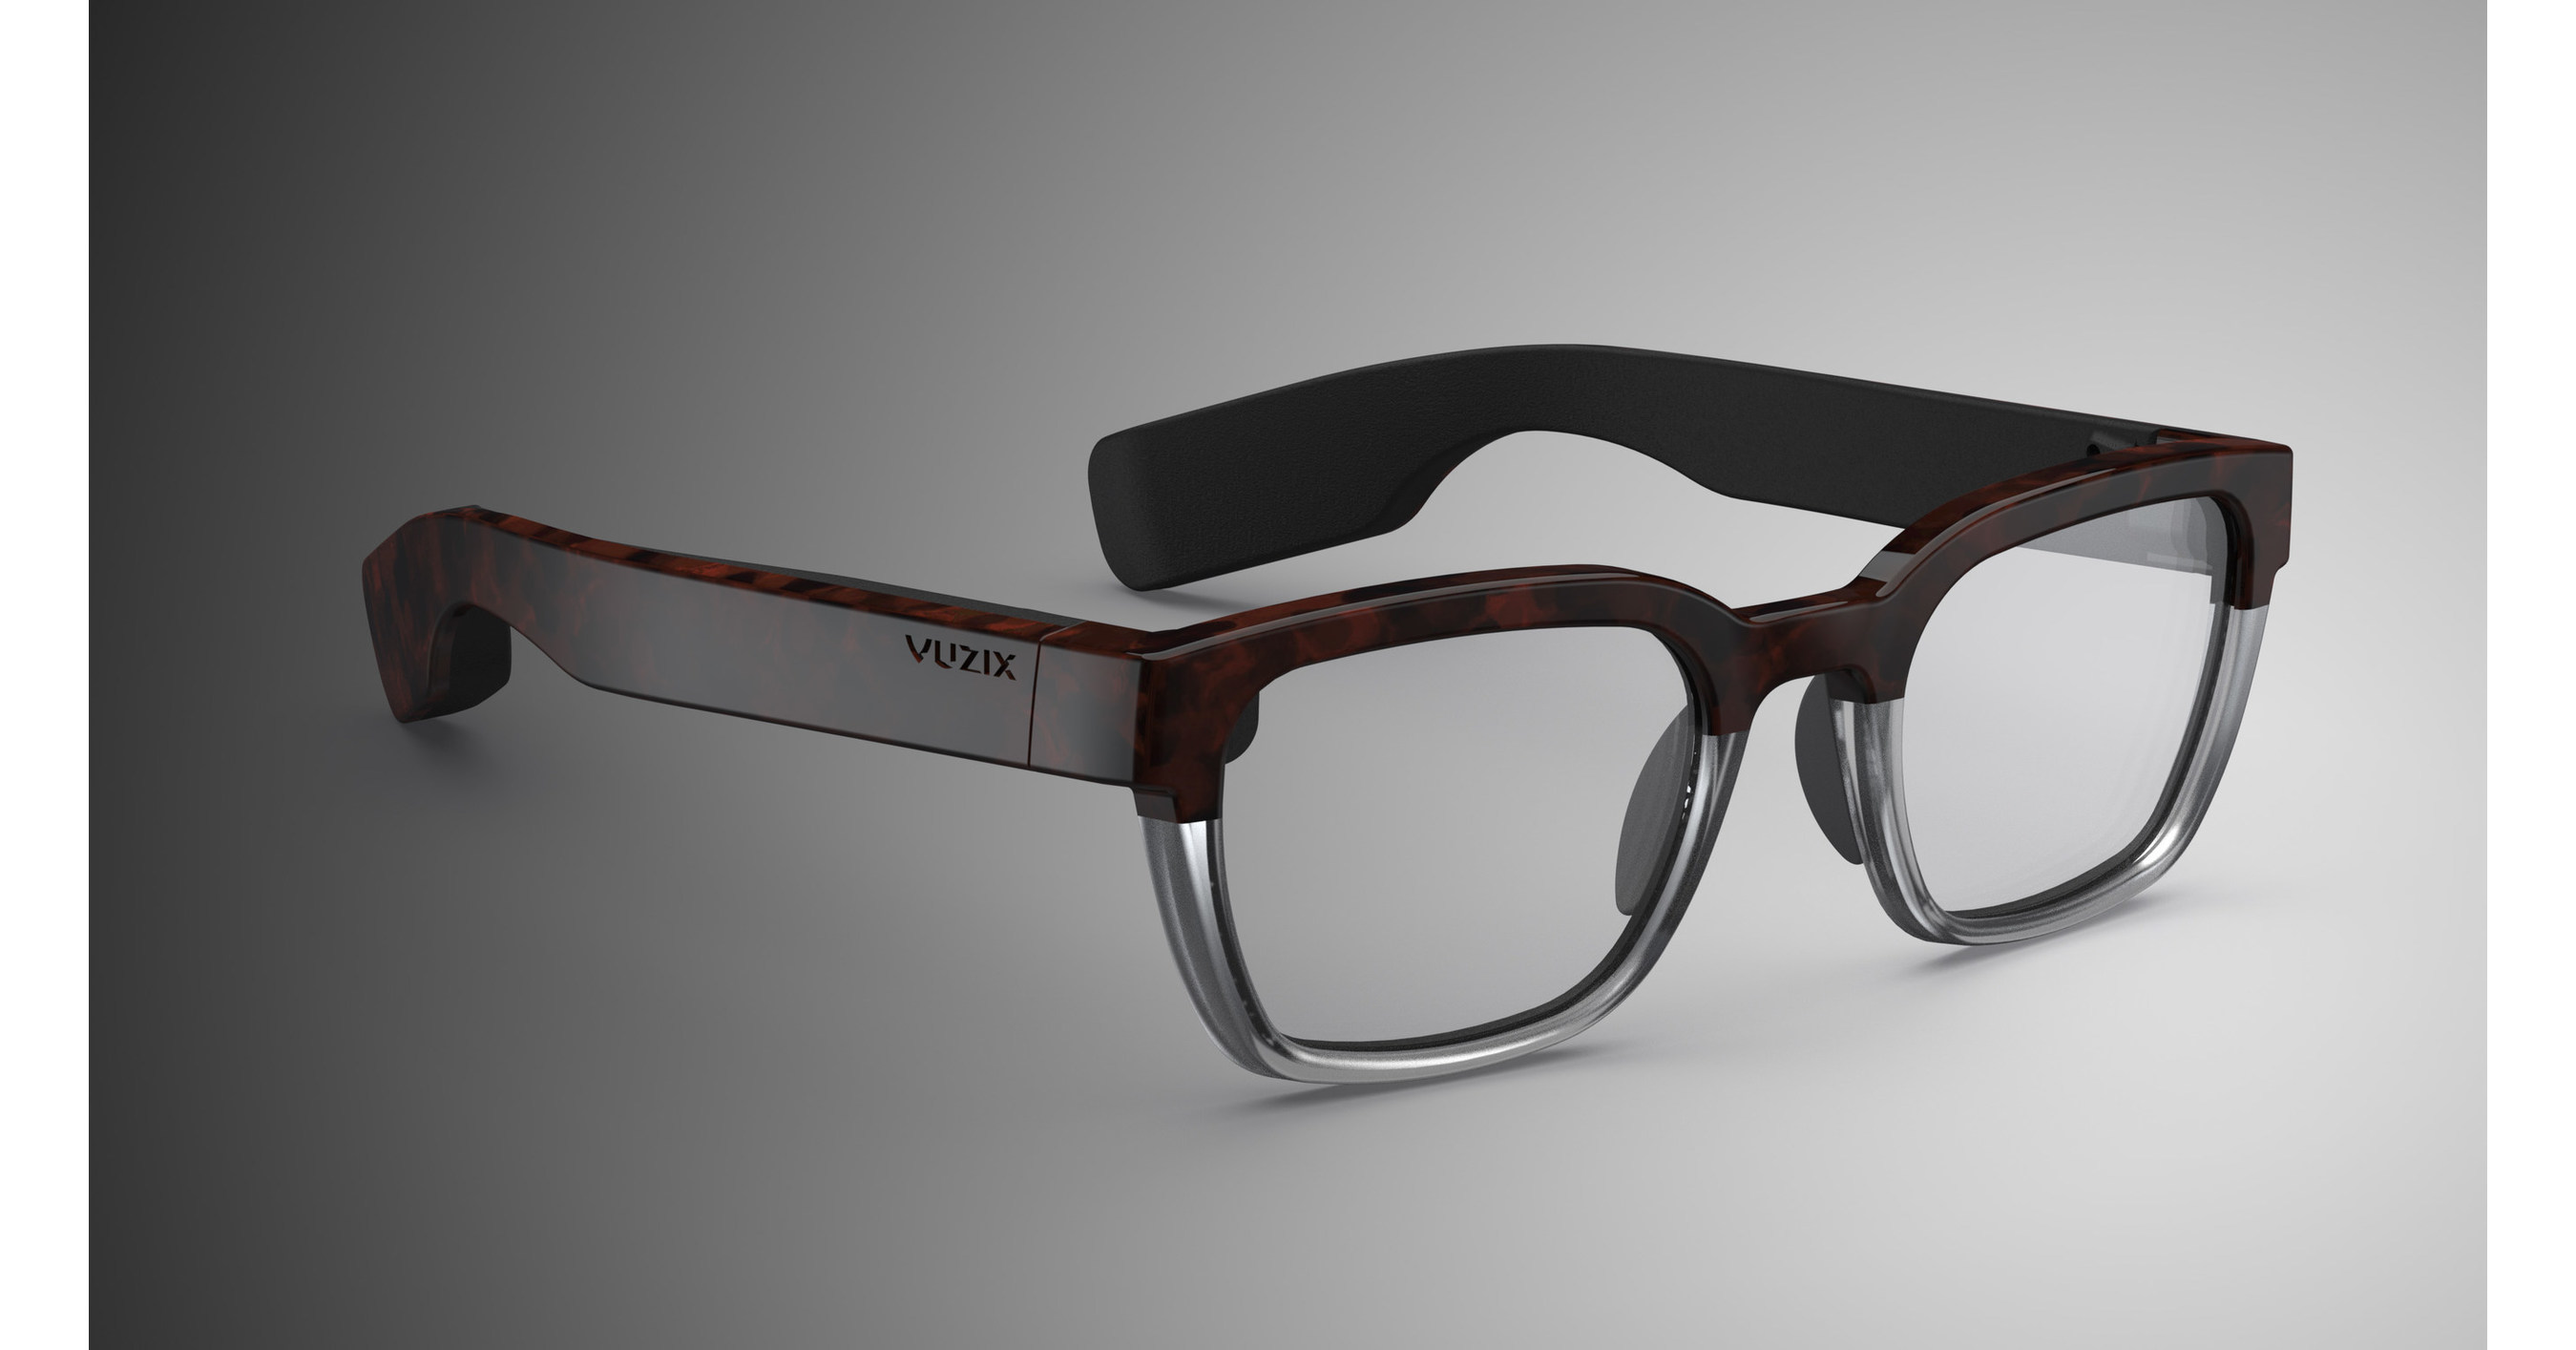 Fully self-contained wireless AR smart glasses